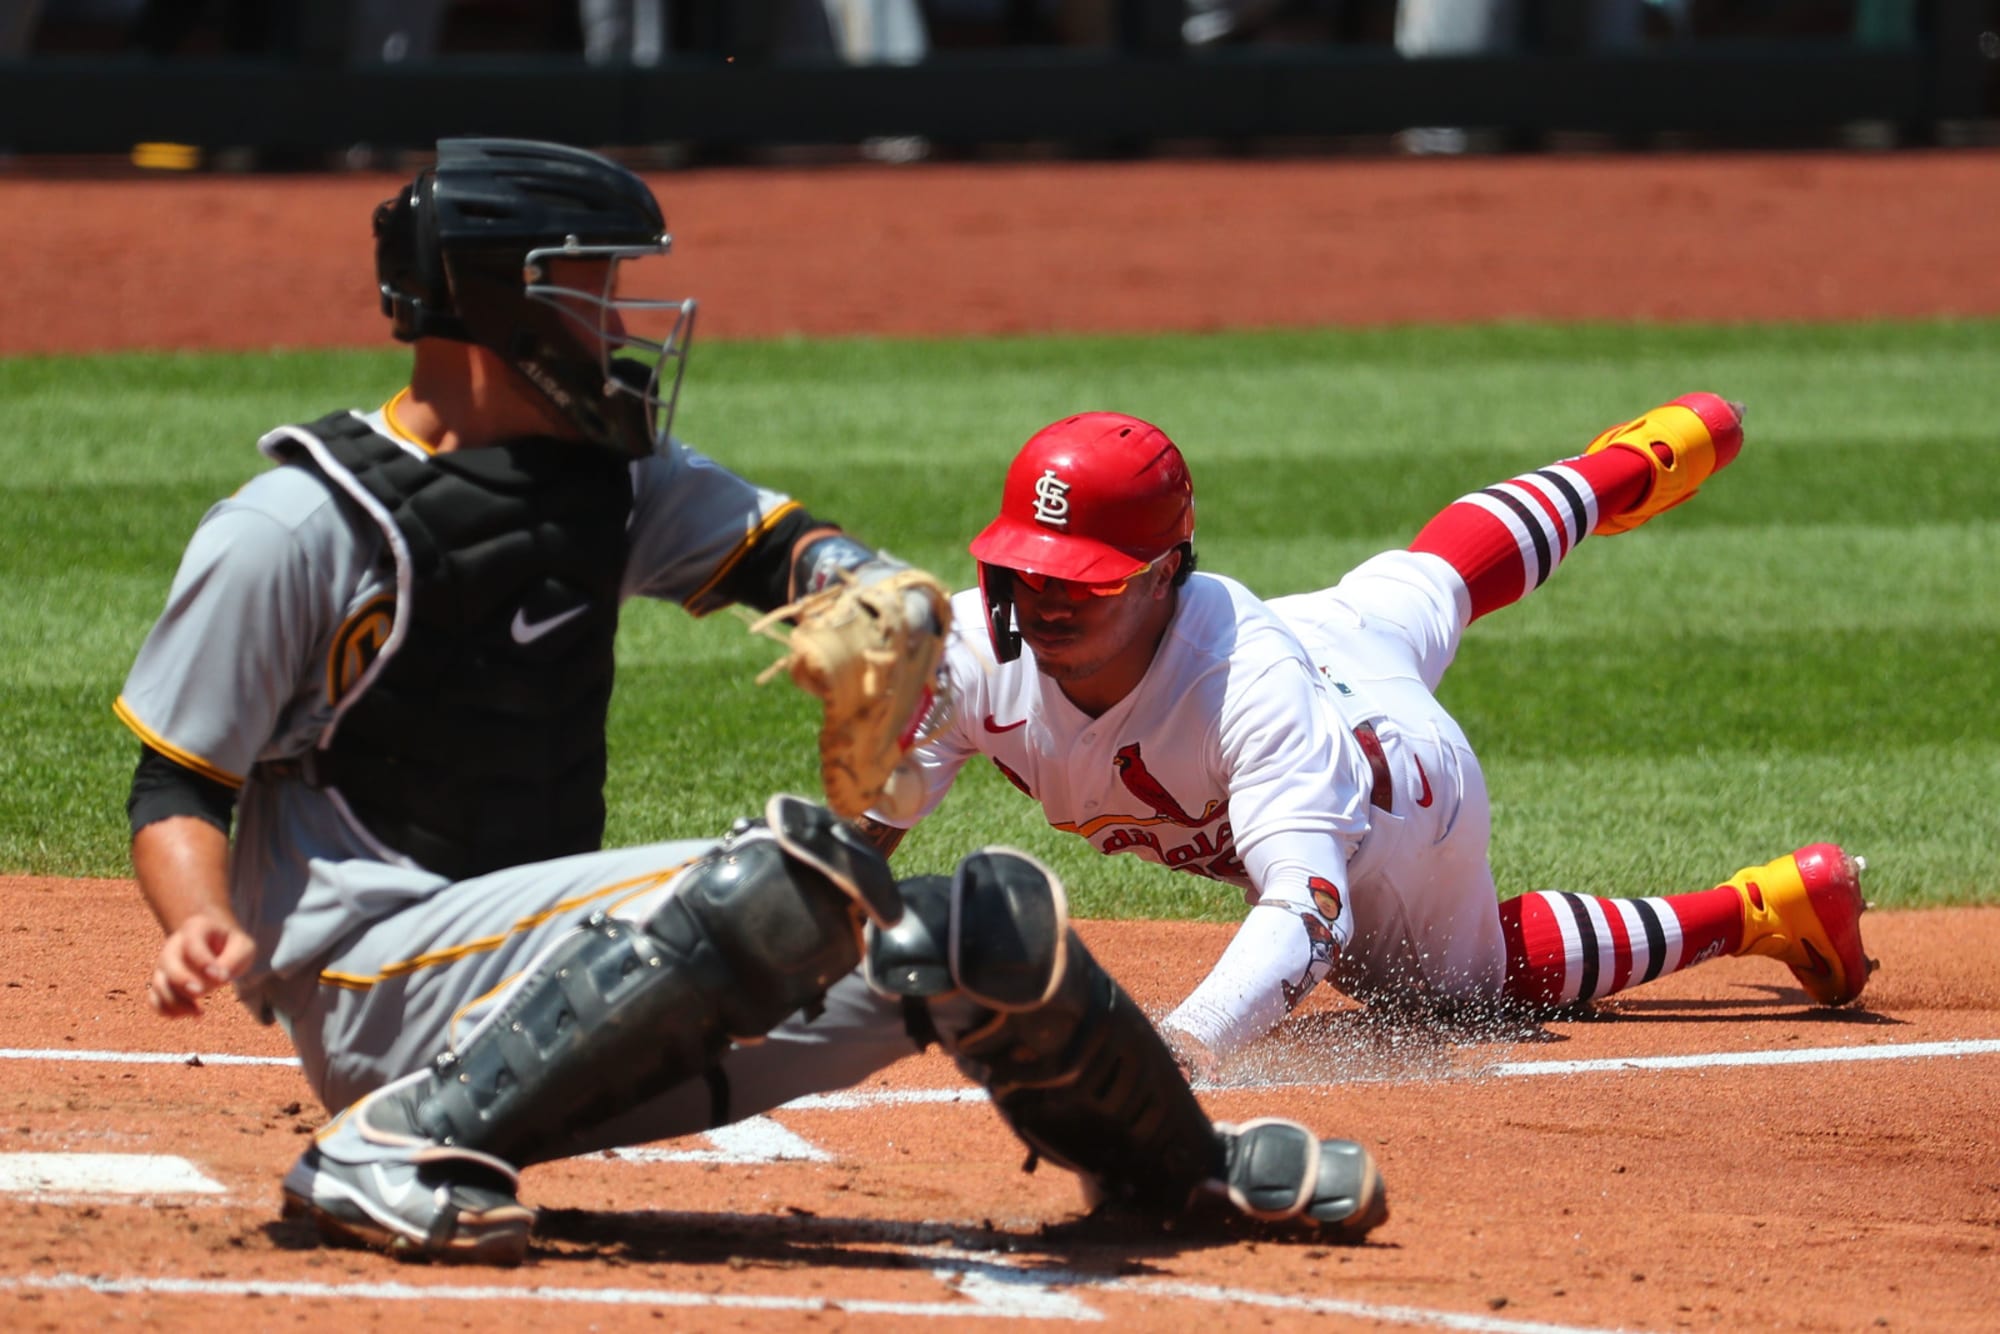 St. Louis Cardinals: Three takeaways from the opening series win